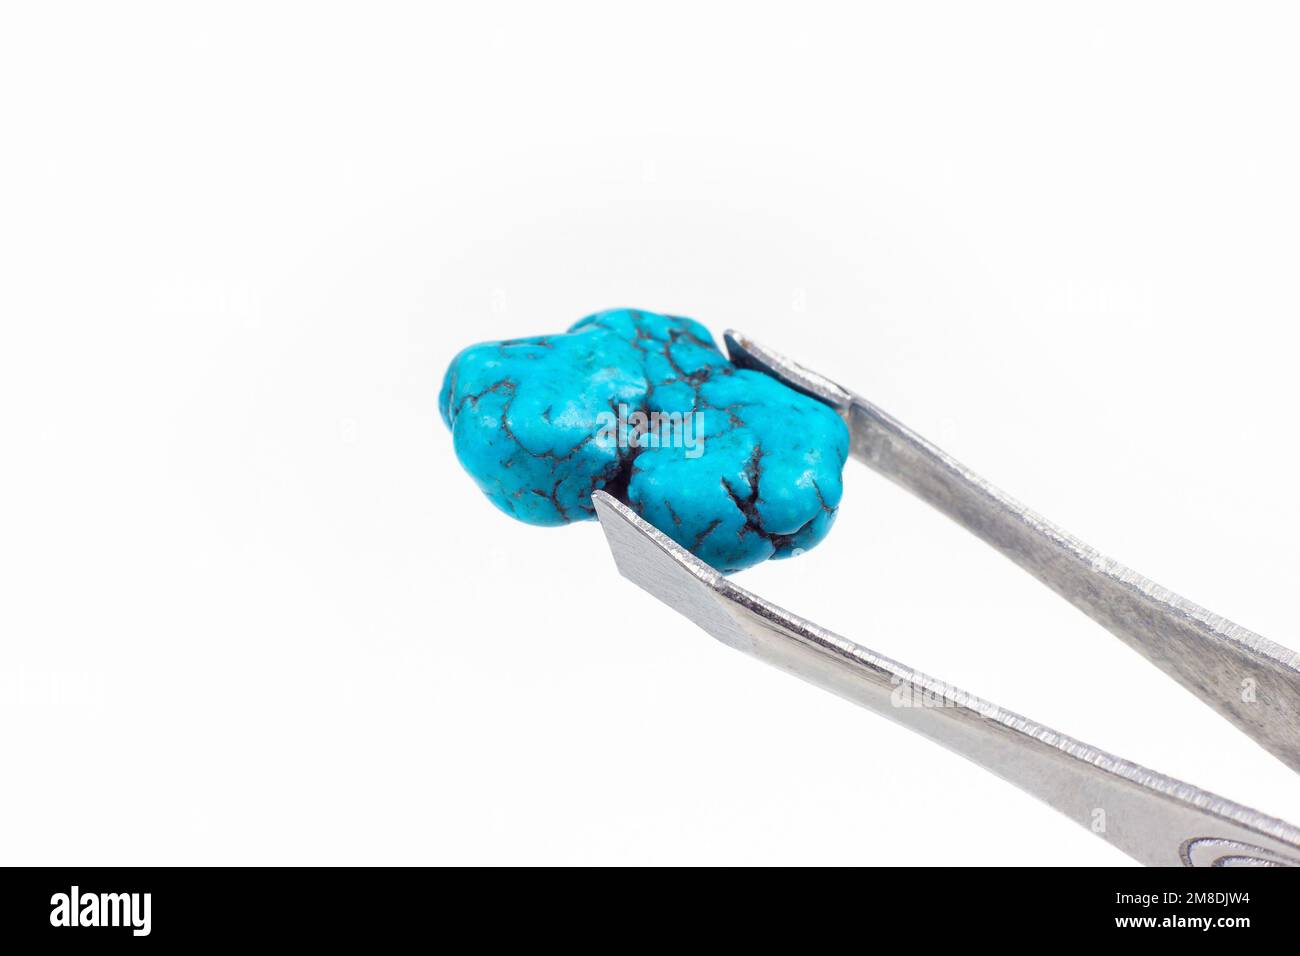 Bright light blue Turquoise crystal gem in the pincers on light background close up with copy space. Stock Photo